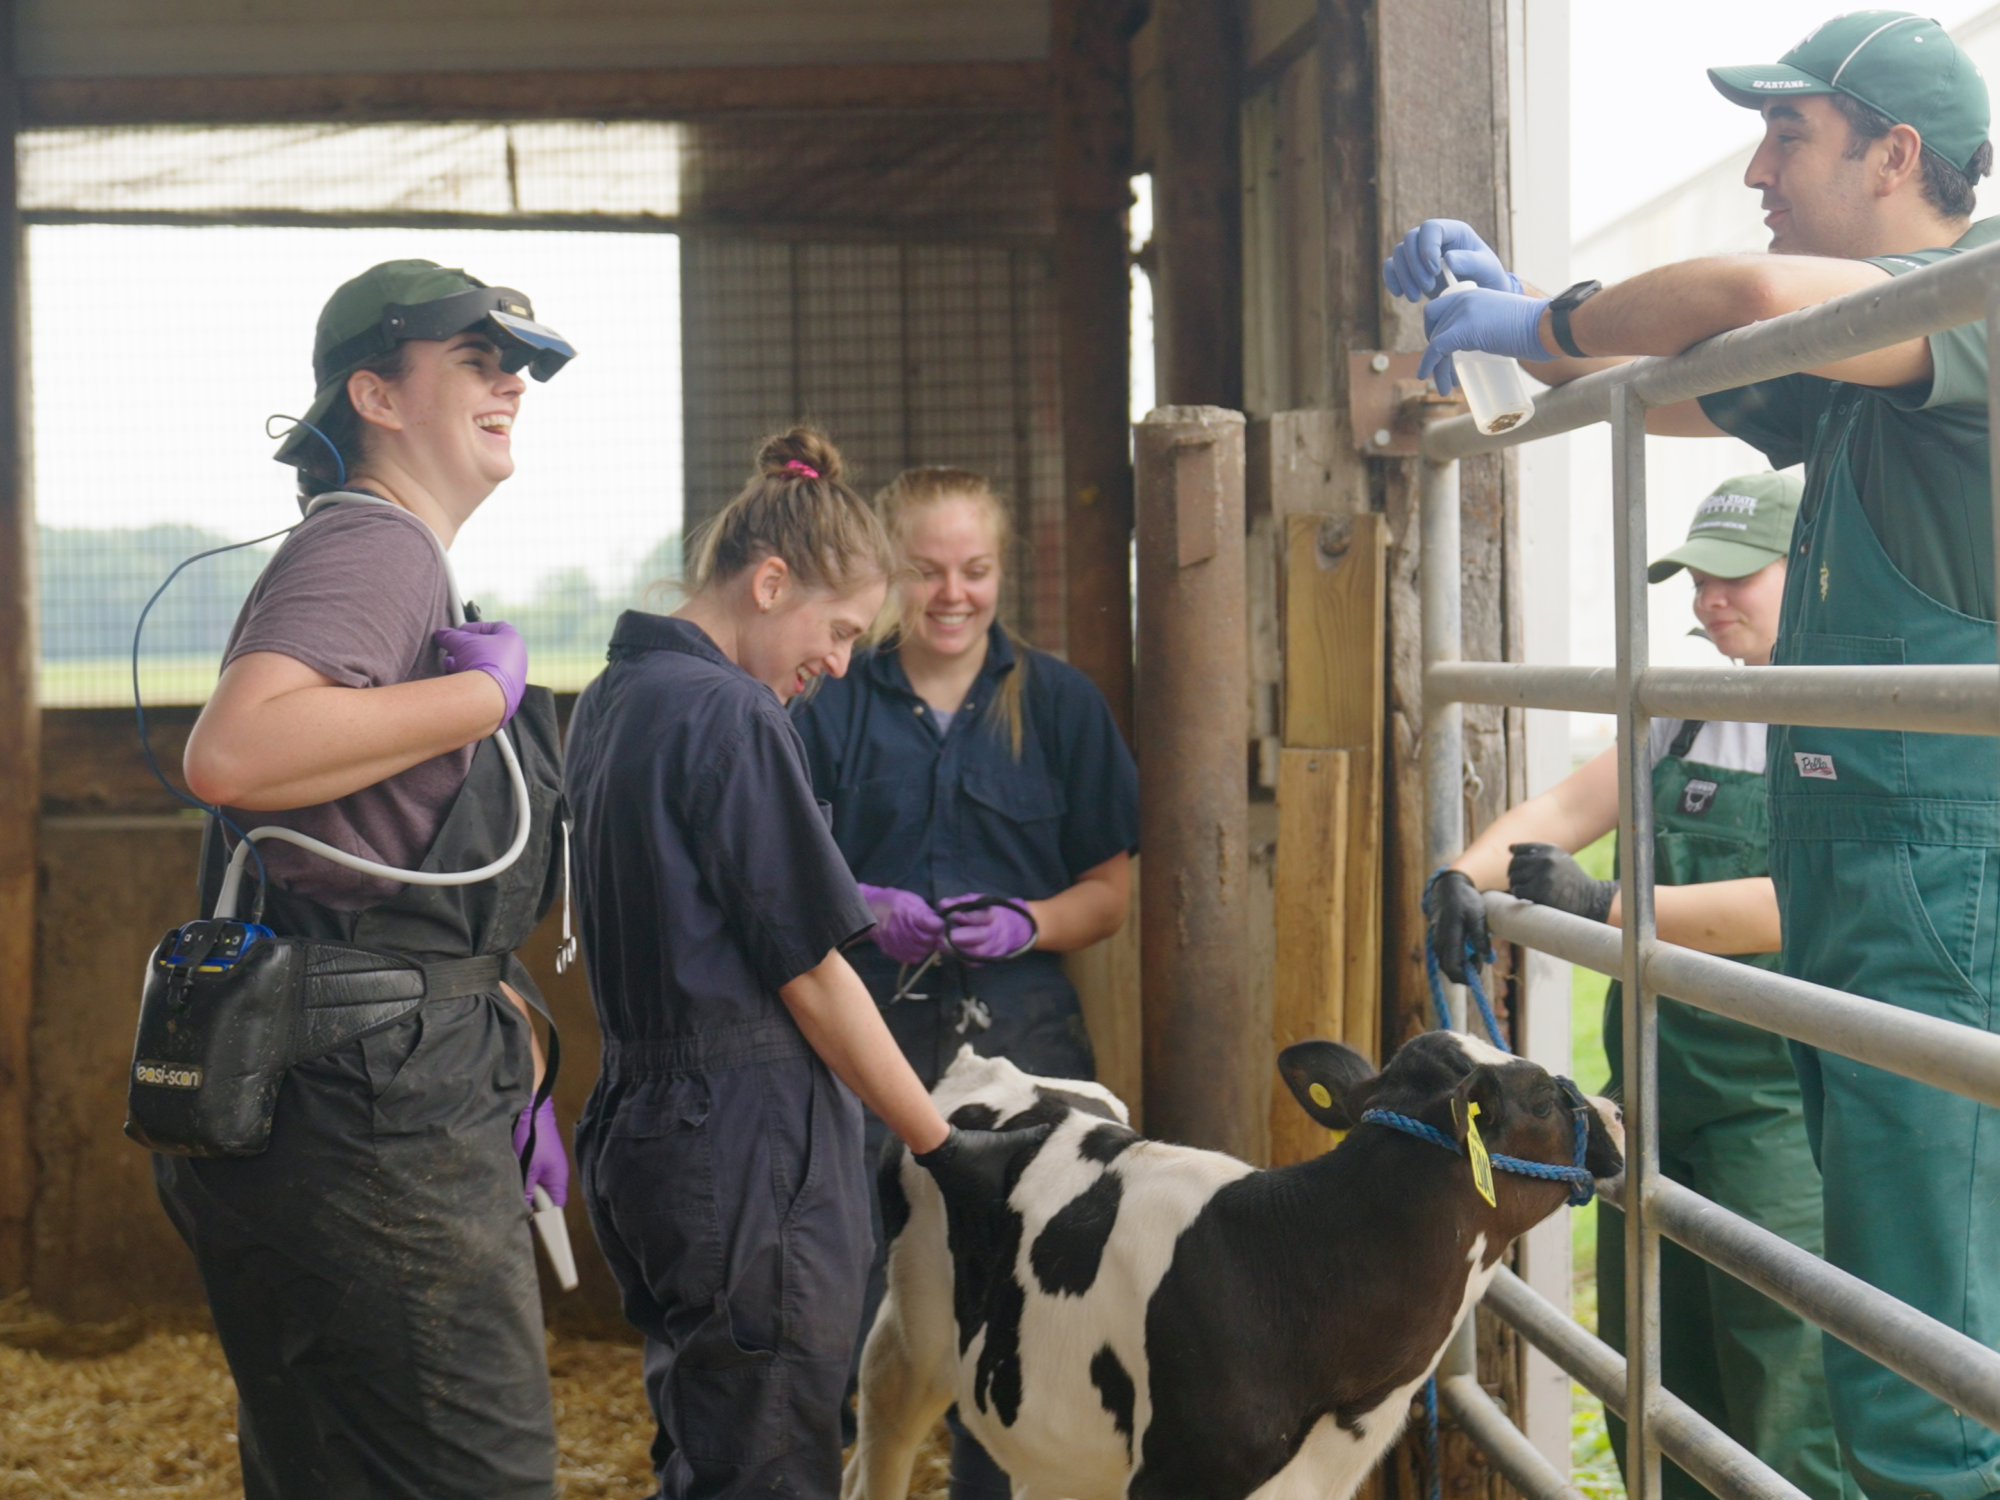 Ángel Abuelo works with final-year veterinary students completing an advanced dairy production medicine clinical rotation at Car-Min-Vu Farm in Webberville. The students are performing a thoracic lung ultrasound to evaluate the presence of subclinical respiratory disease in calves.